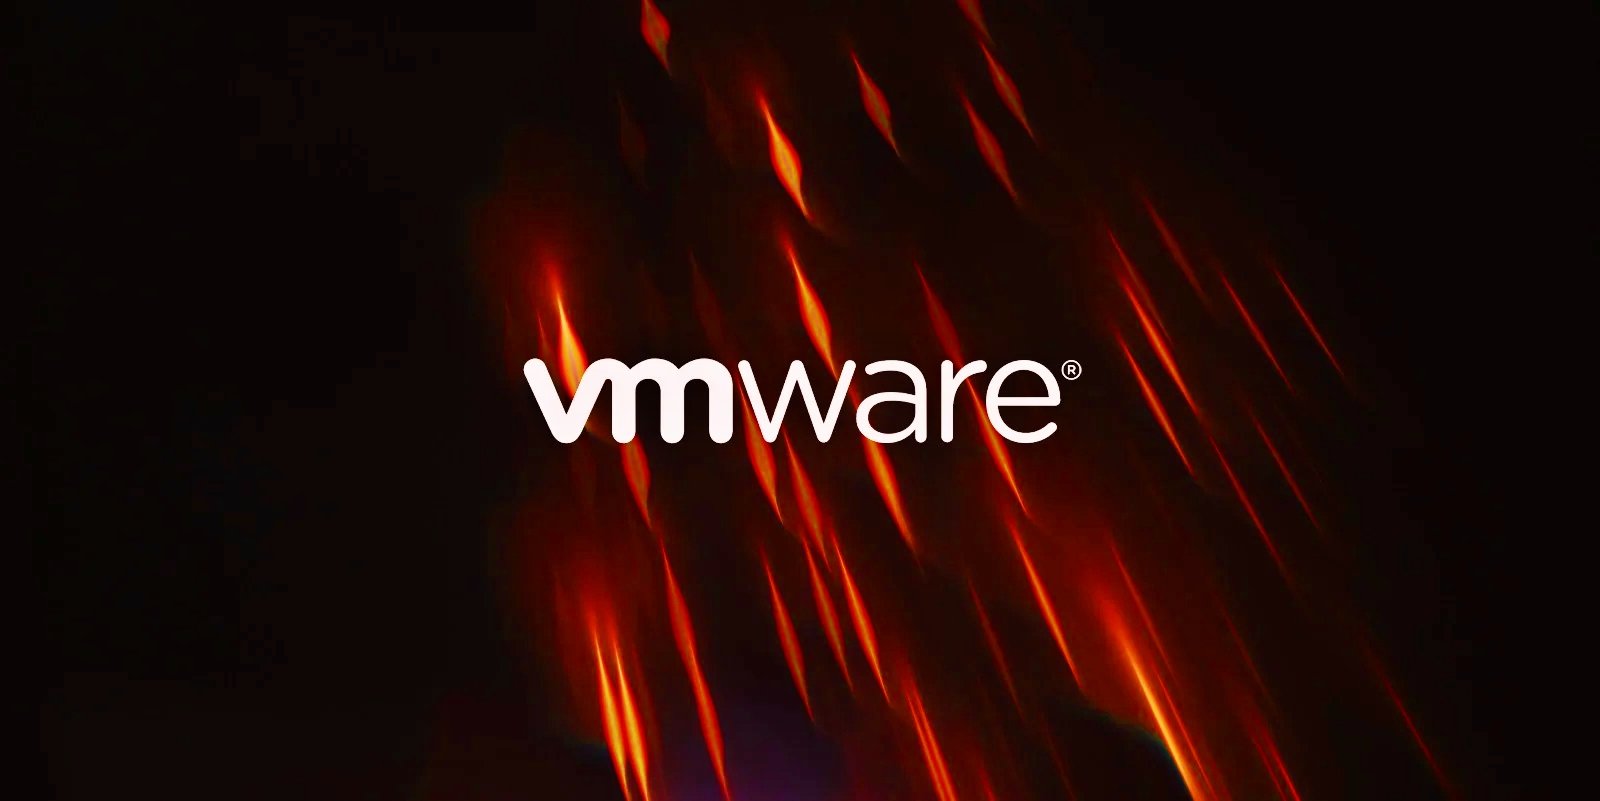 VMware warns of critical vulnerabilities in multiple products